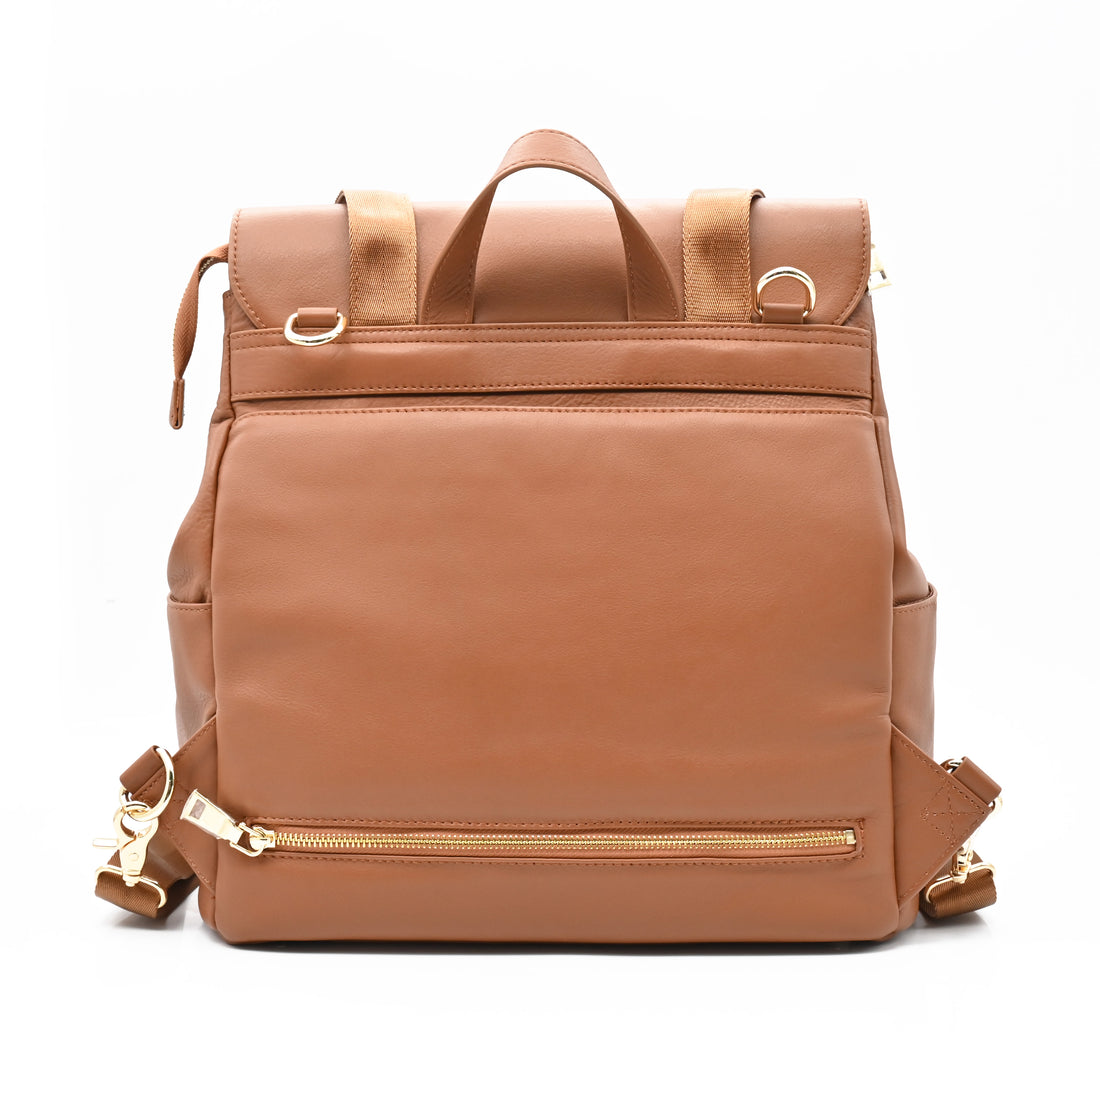 Milan leather saddle backpack back view